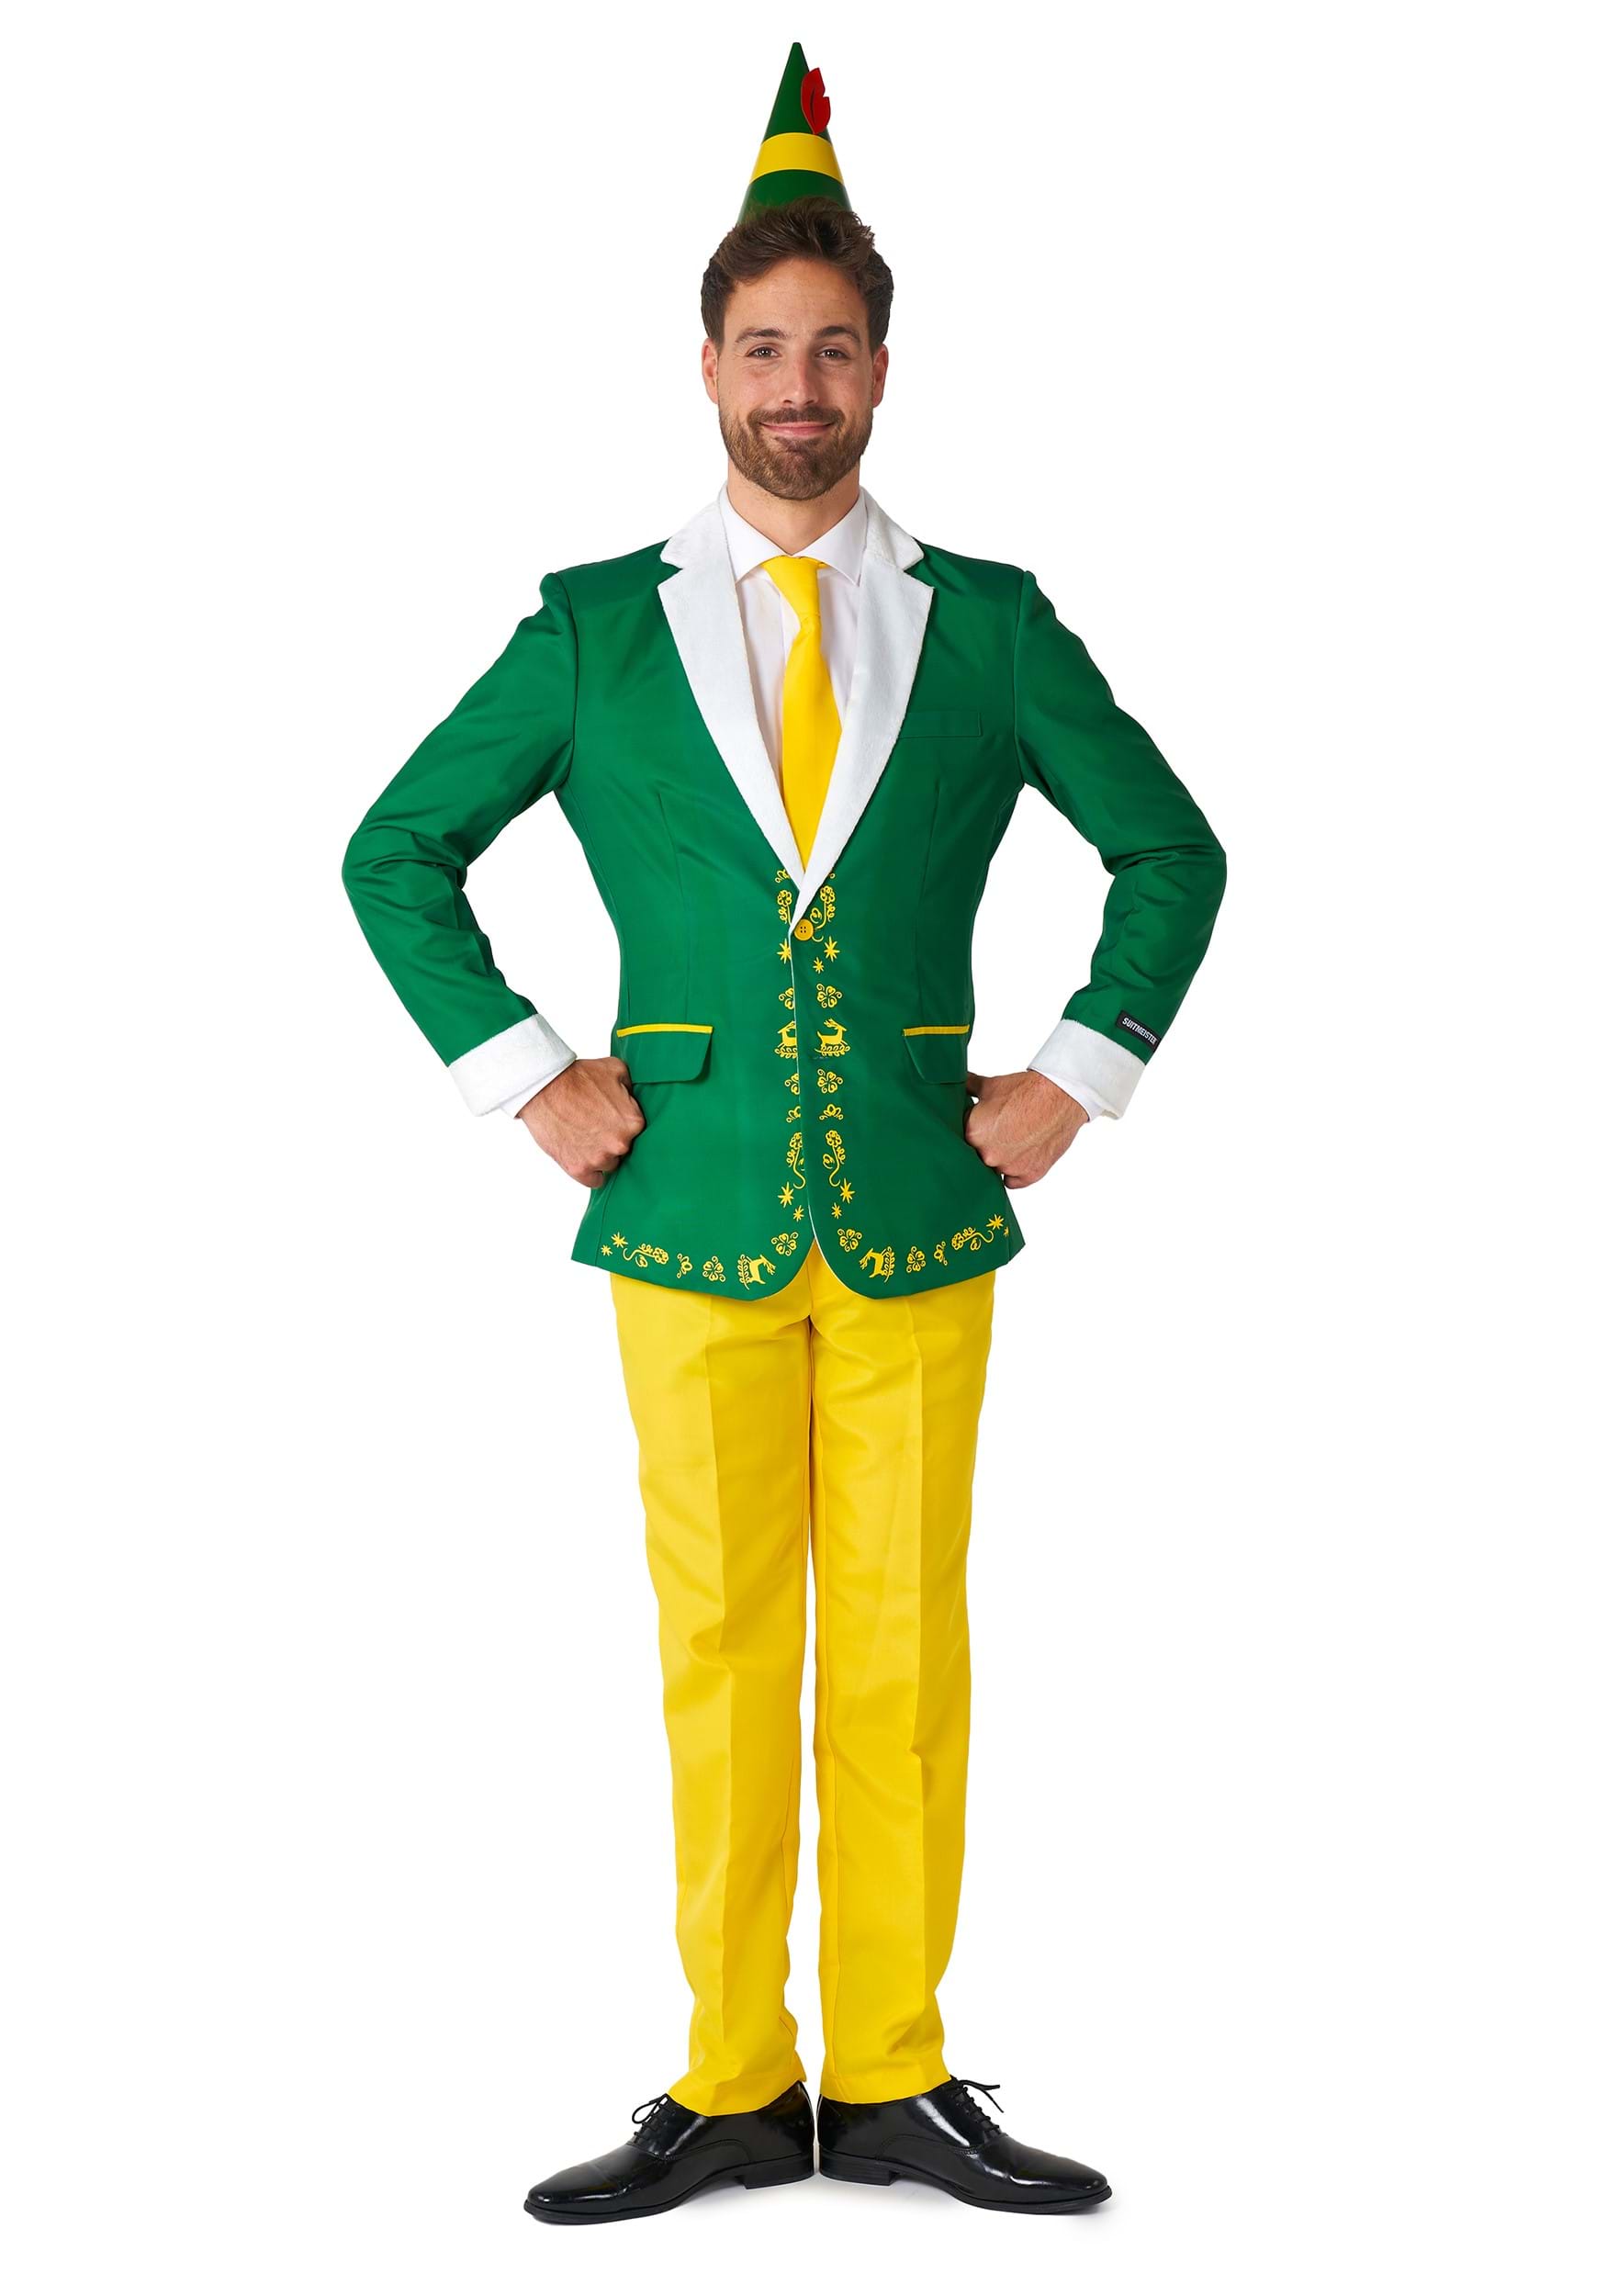 Image of Adult Buddy the Elf Suitmeister Suit ID OSOBAS-1032-XL